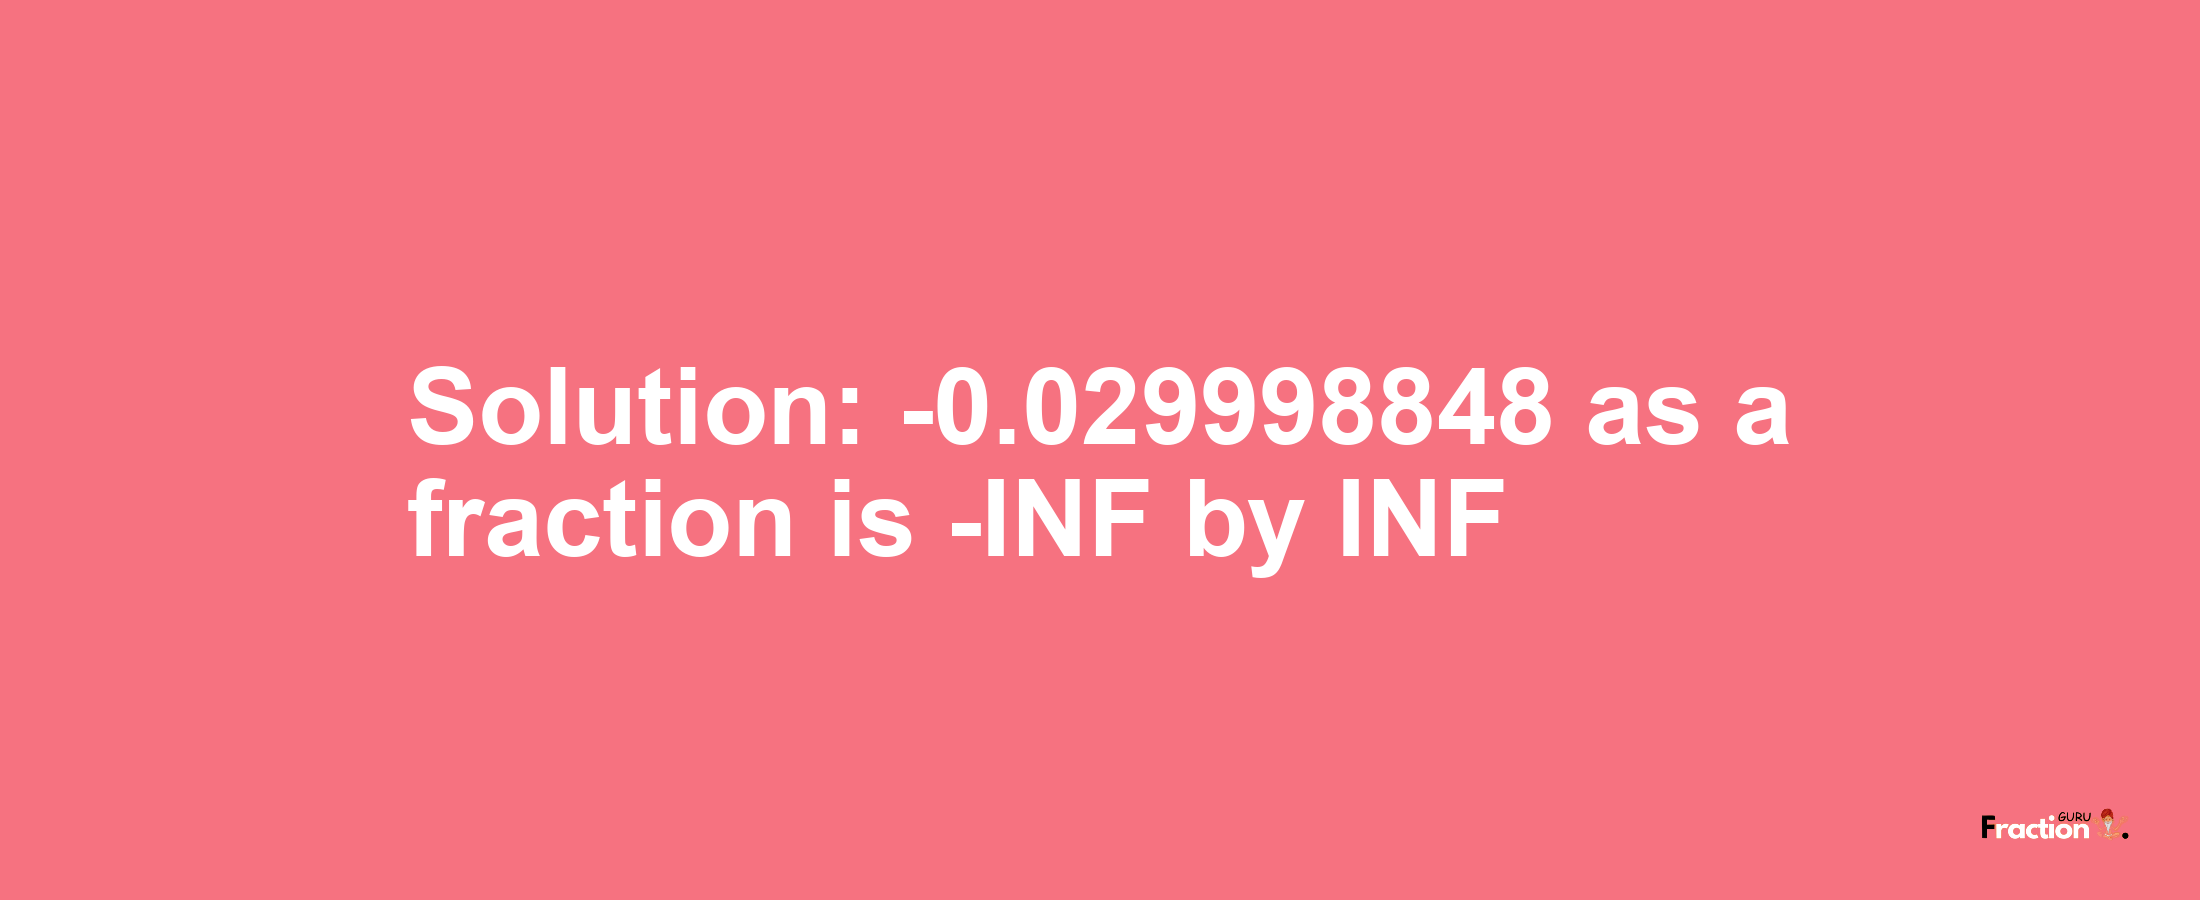 Solution:-0.029998848 as a fraction is -INF/INF